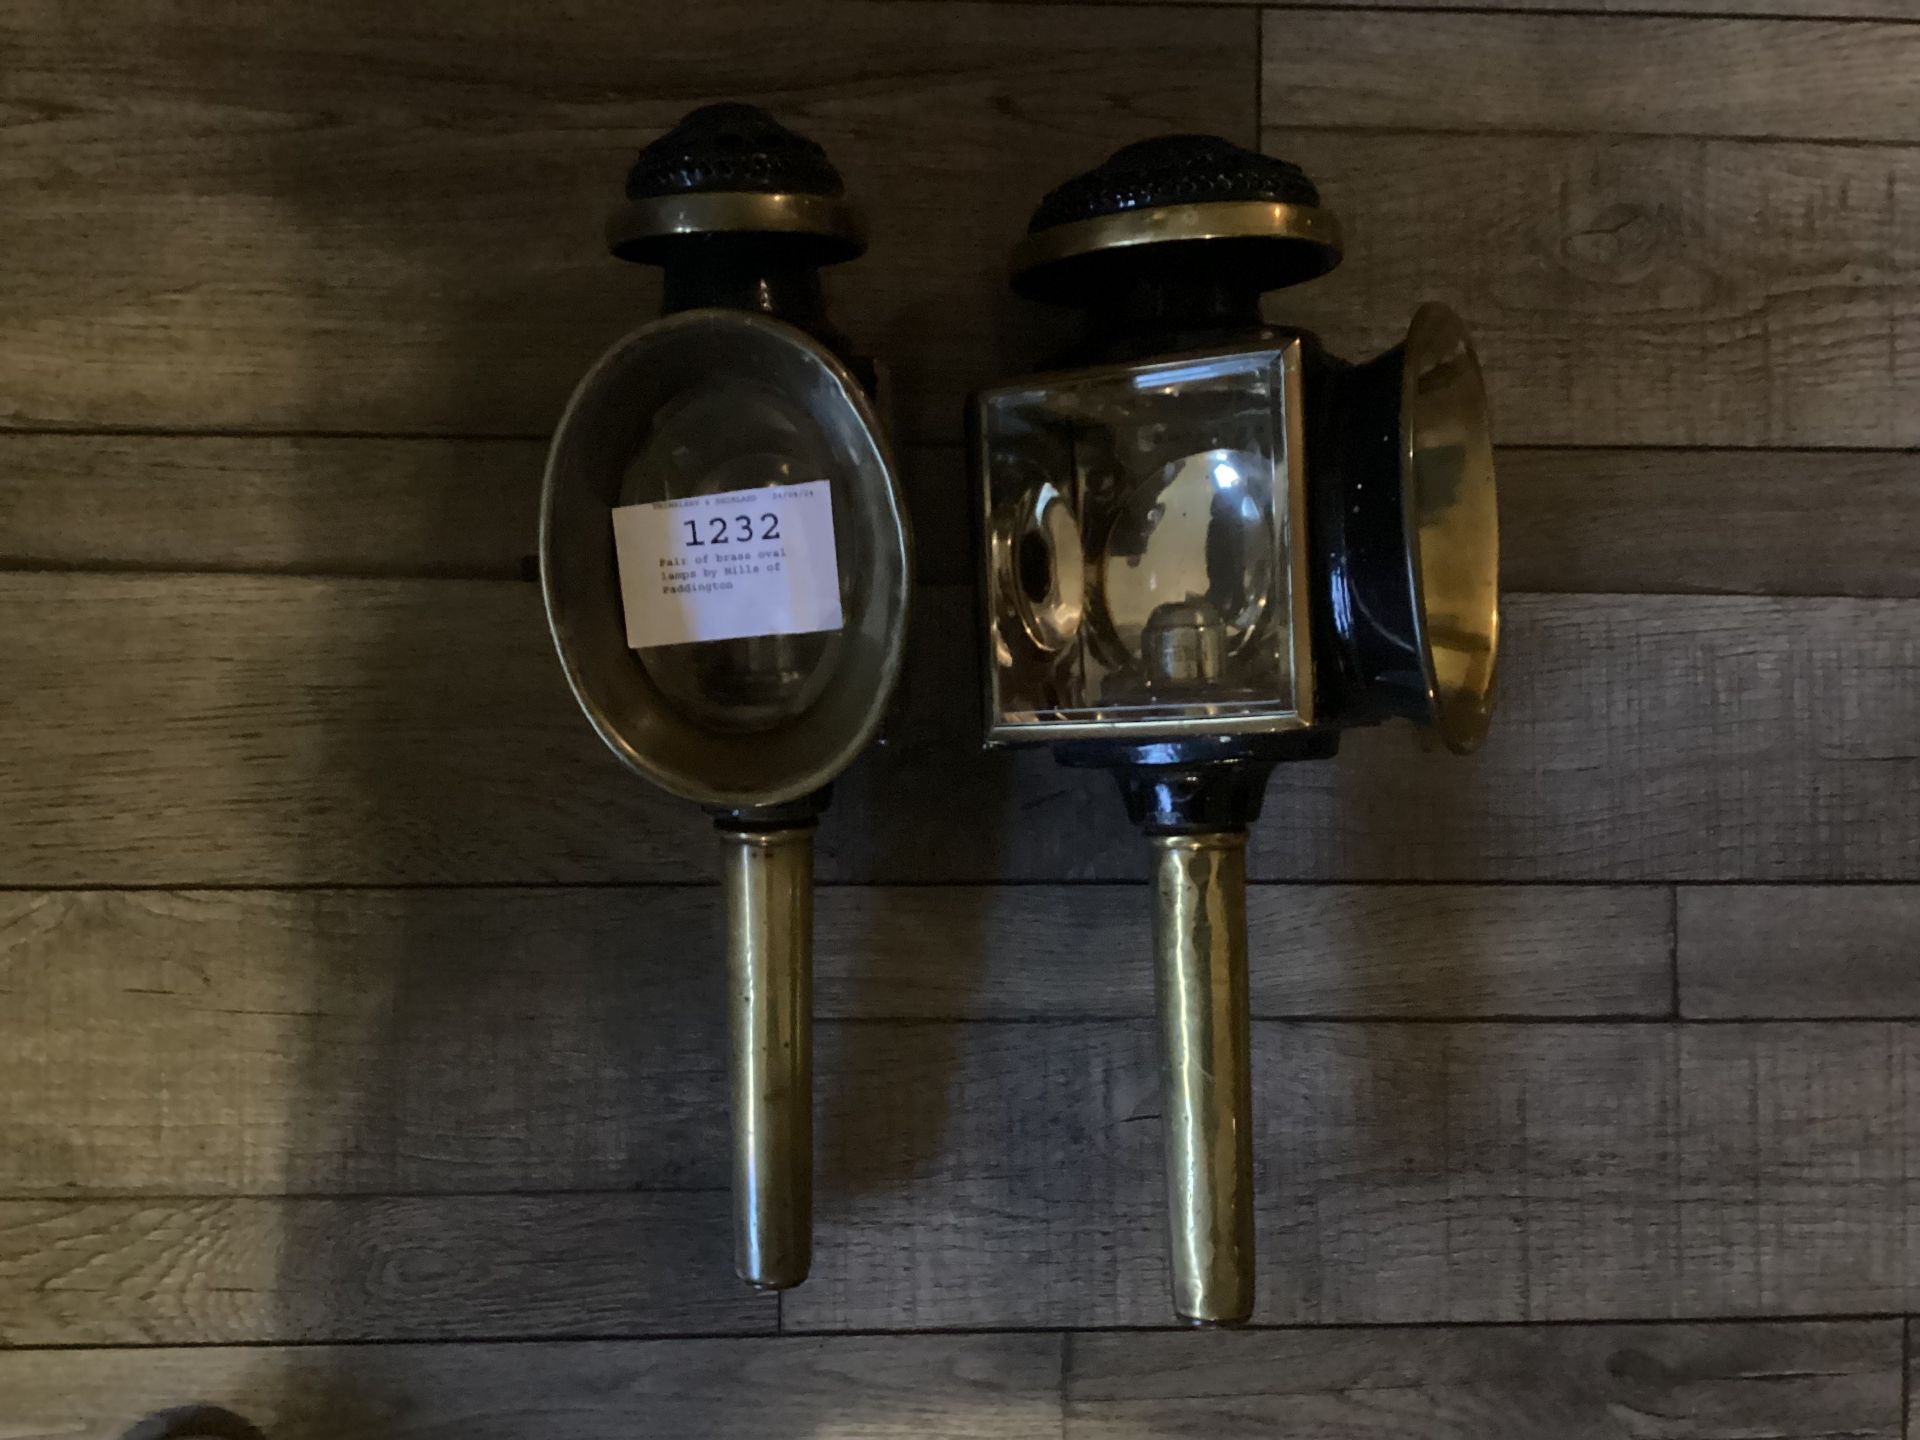 Pair of brass oval lamps by Mills of Paddington